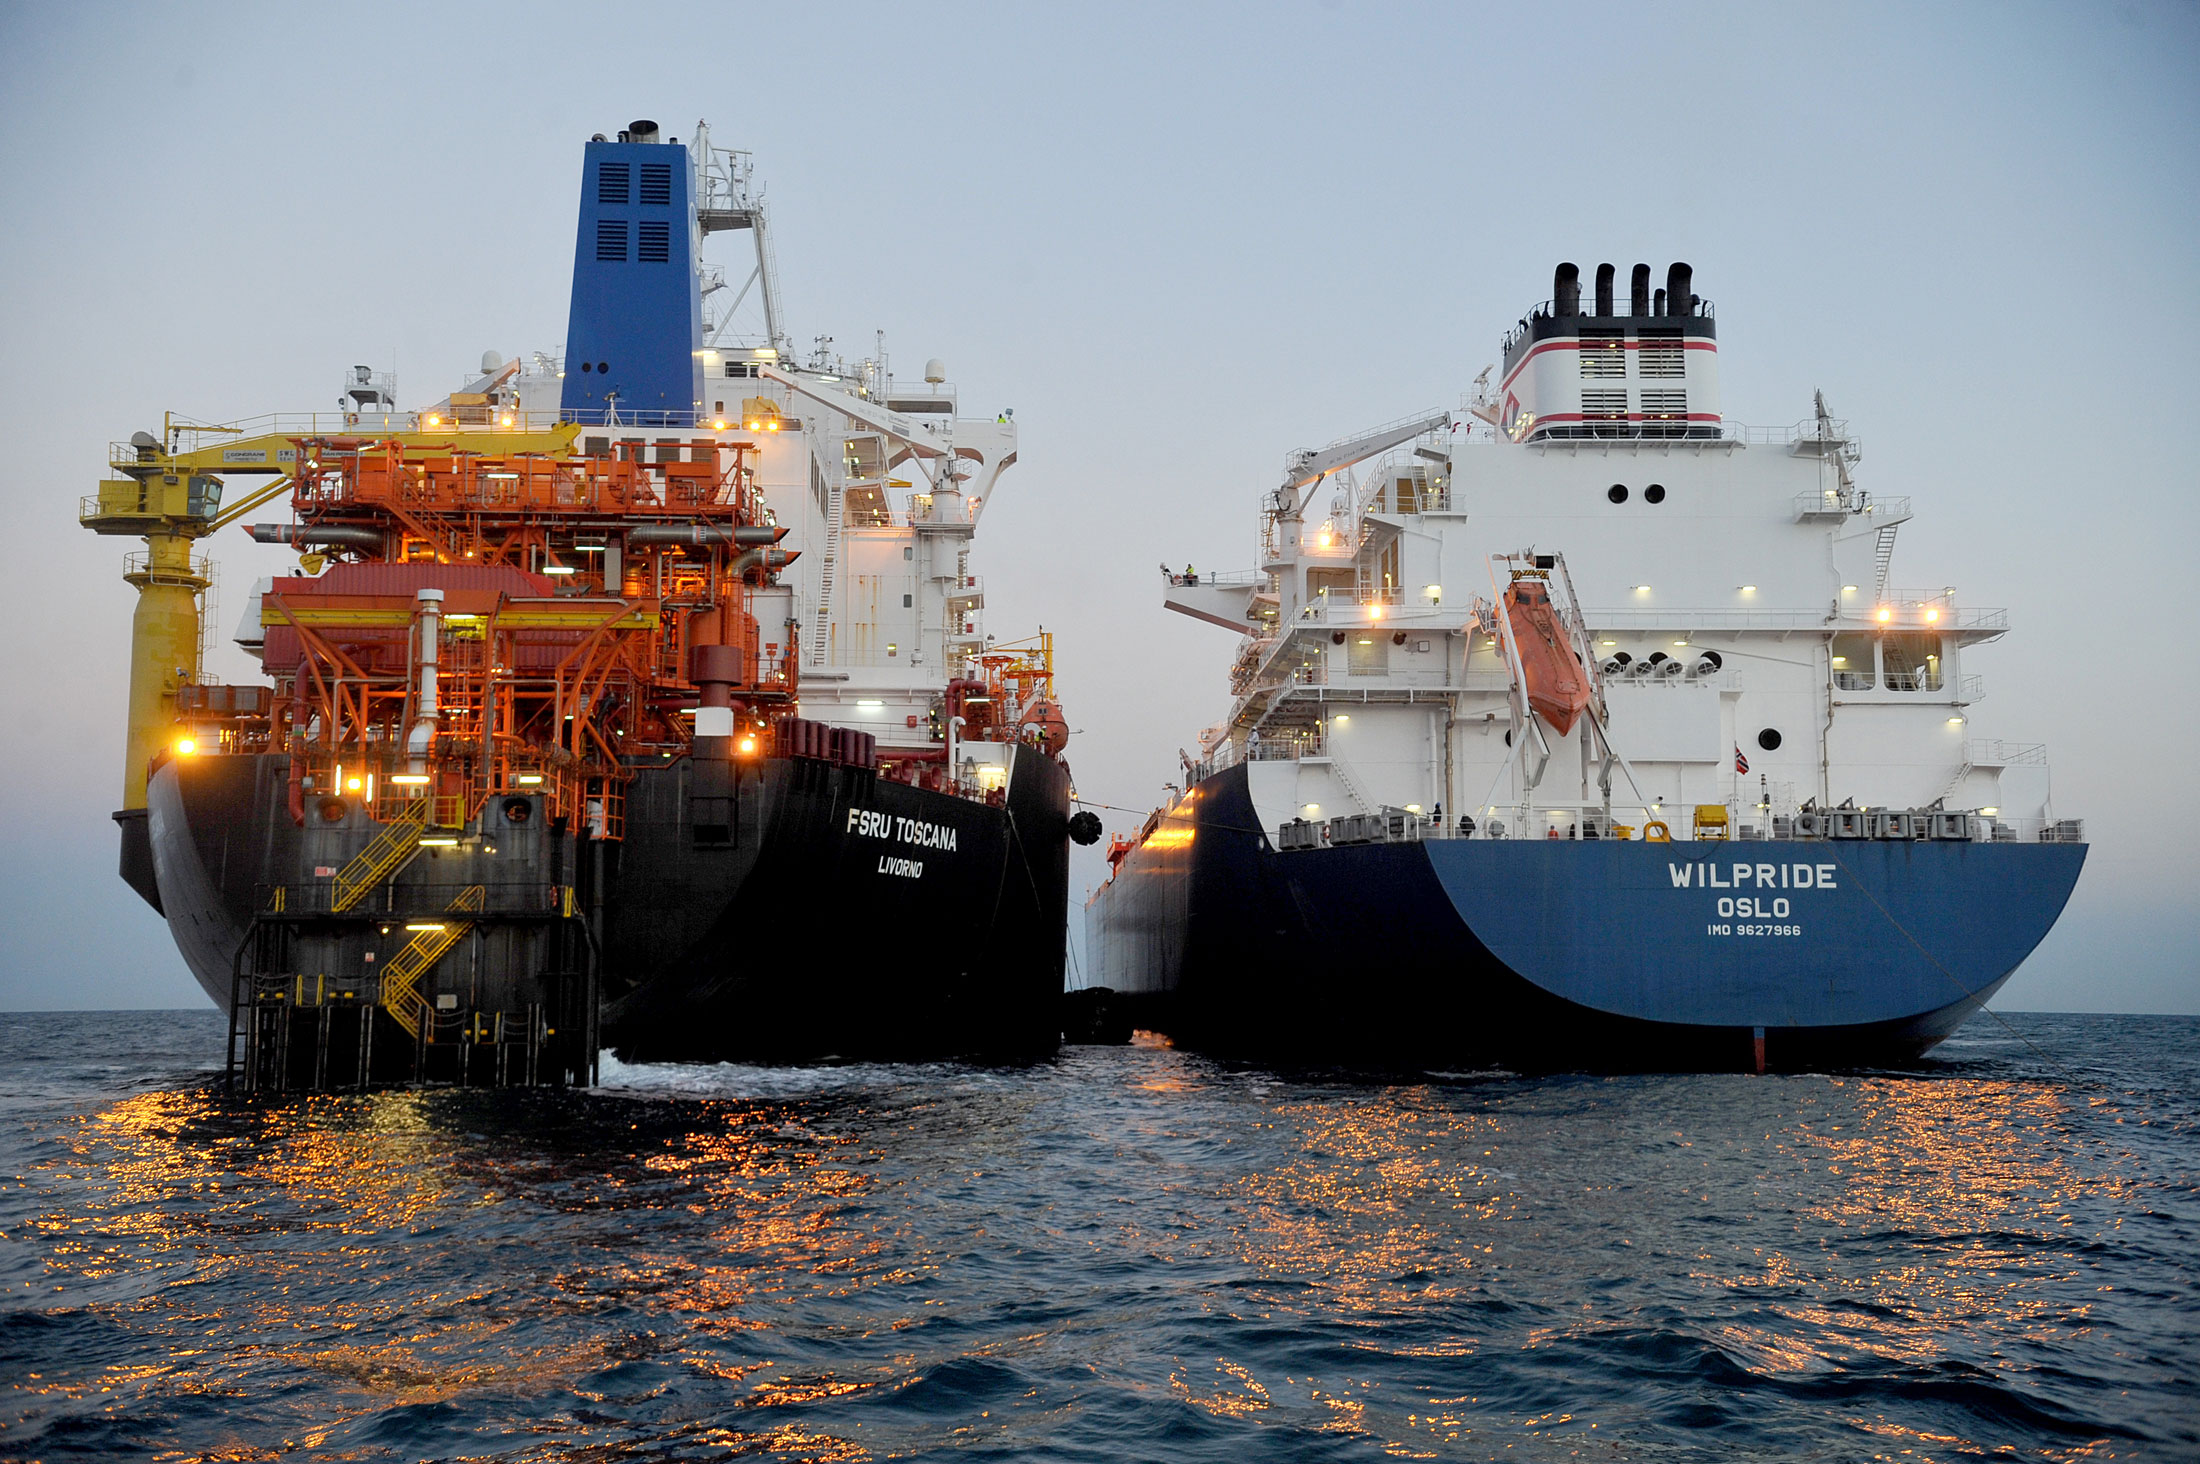 Snam secures stake in OLT LNG terminal